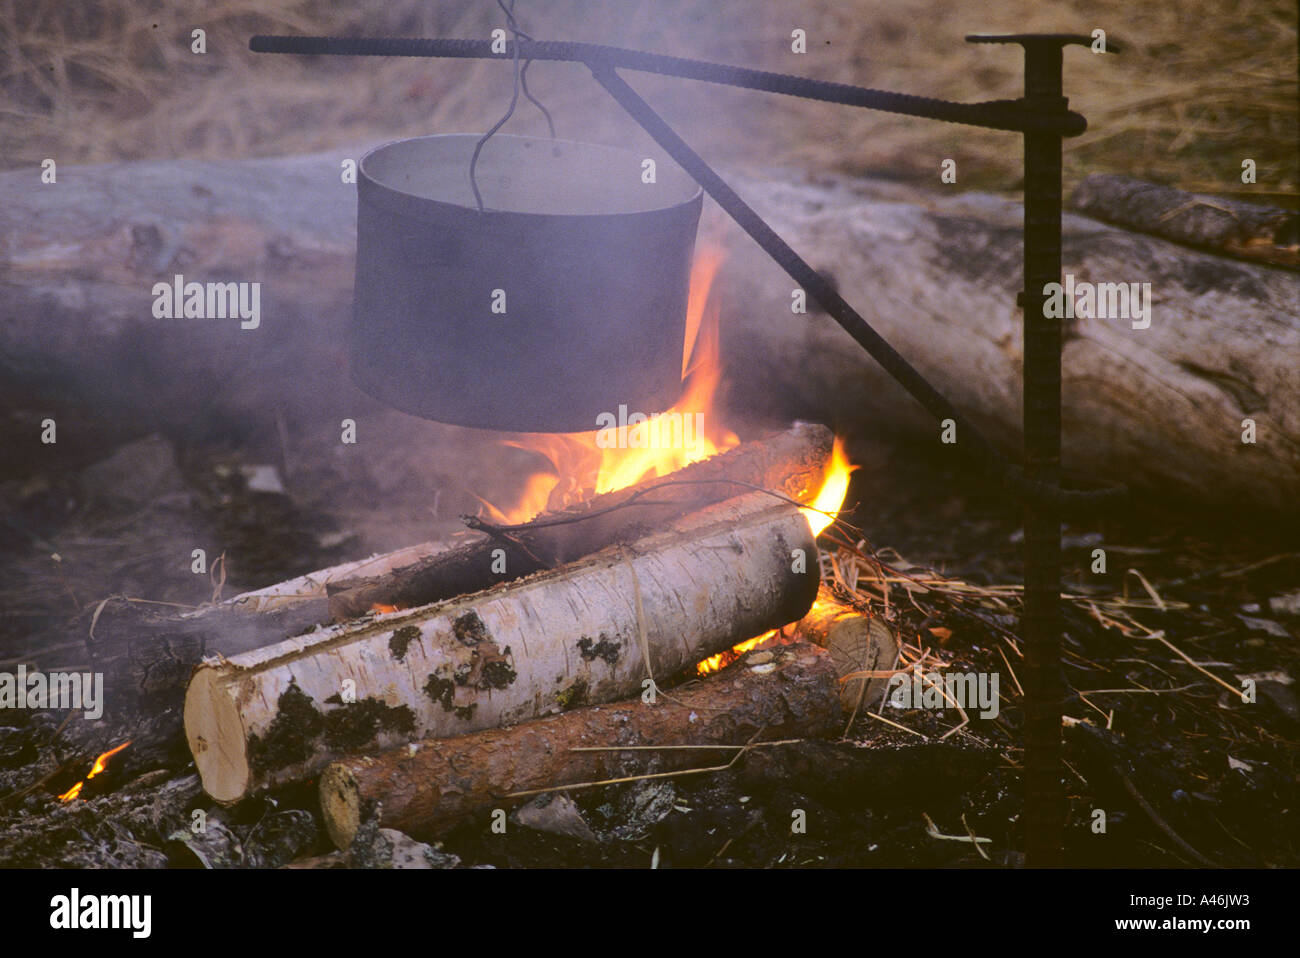 Pot over camp fire Kochtopf ueber Lagerfeuer Stock Photo